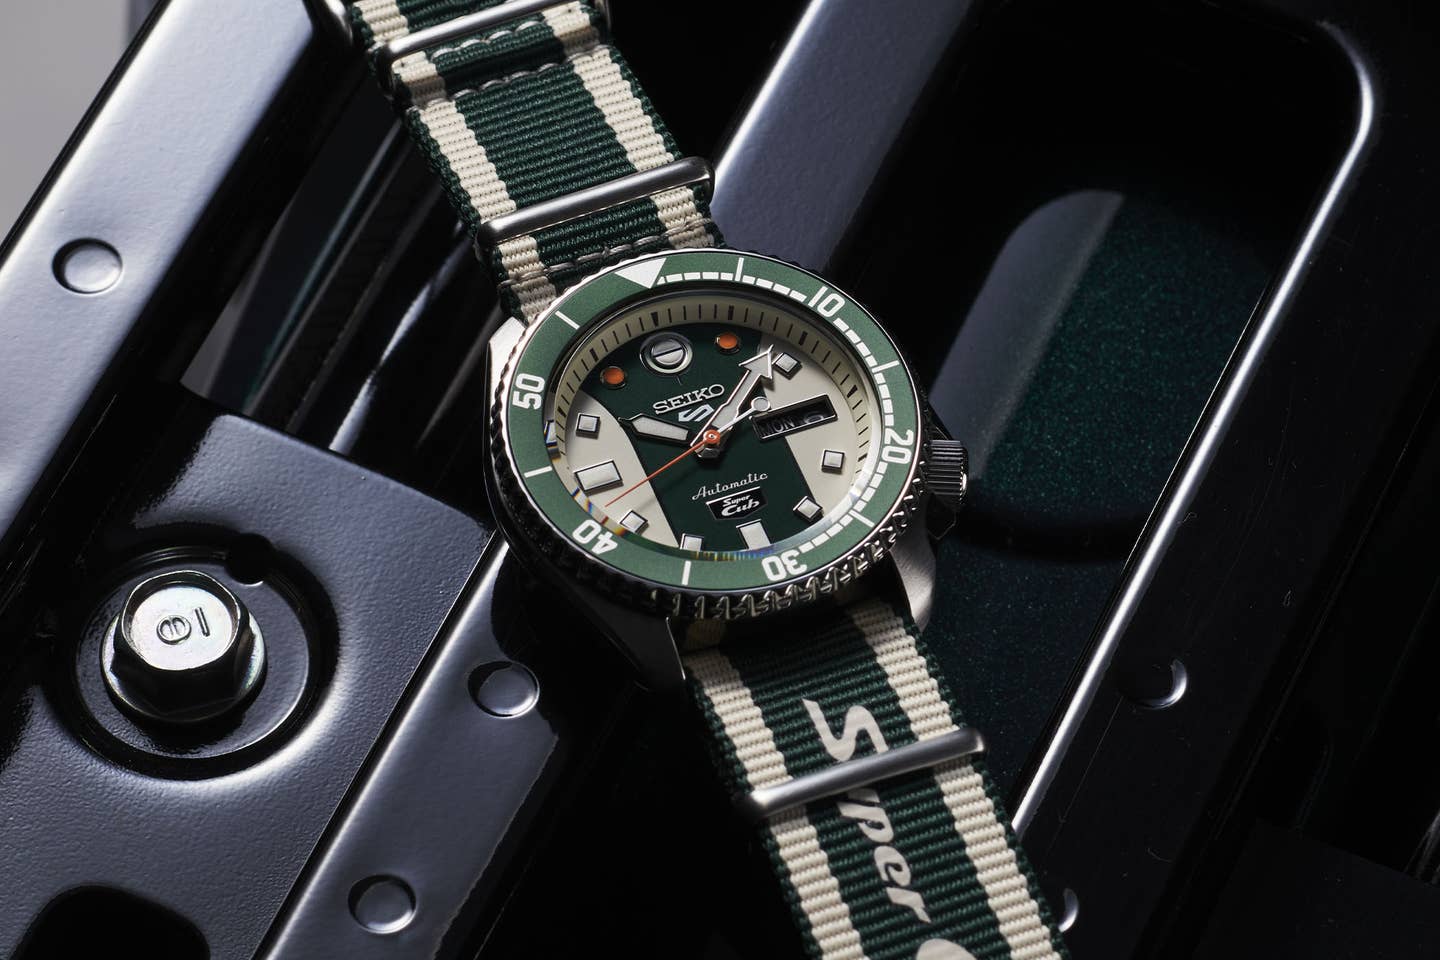 Seiko’s New 5 Sports Super Cub Watches Are Made for Gearheads